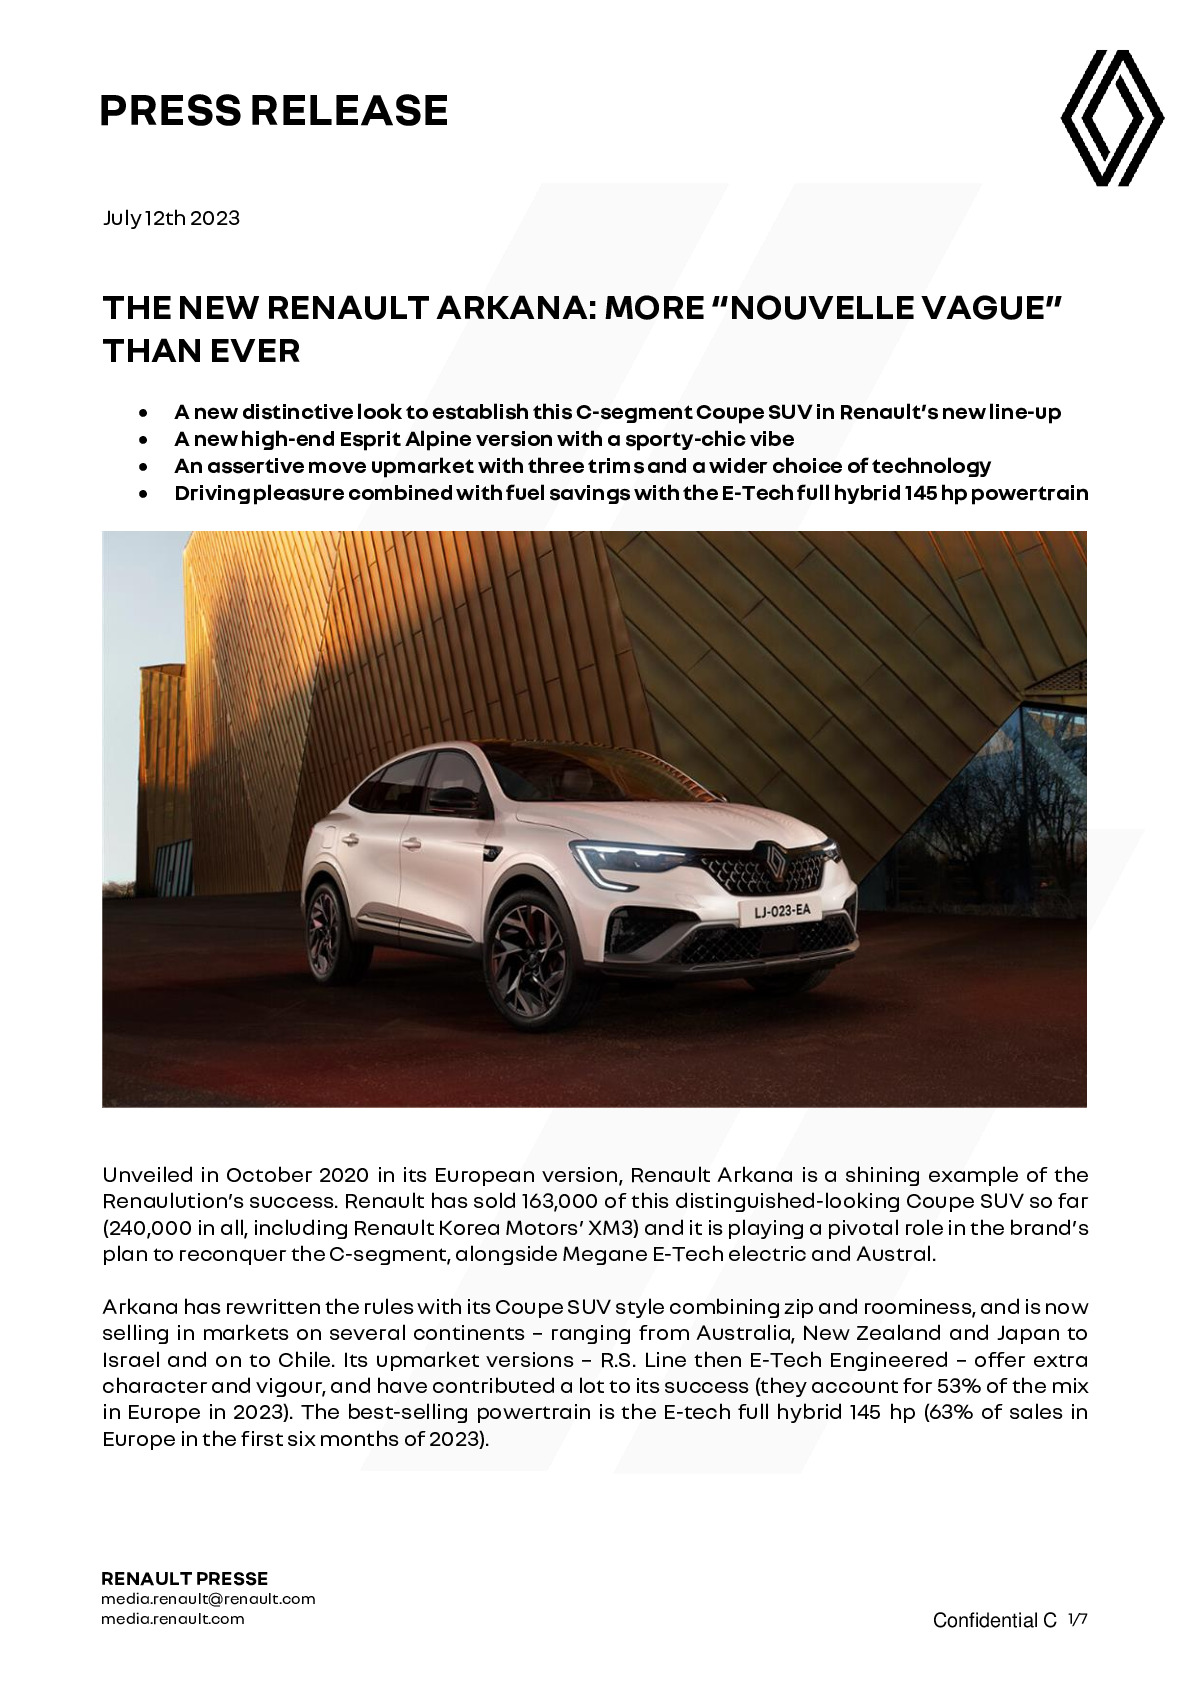 The New Renault Arkana: more “Nouvelle Vague” than ever - Site